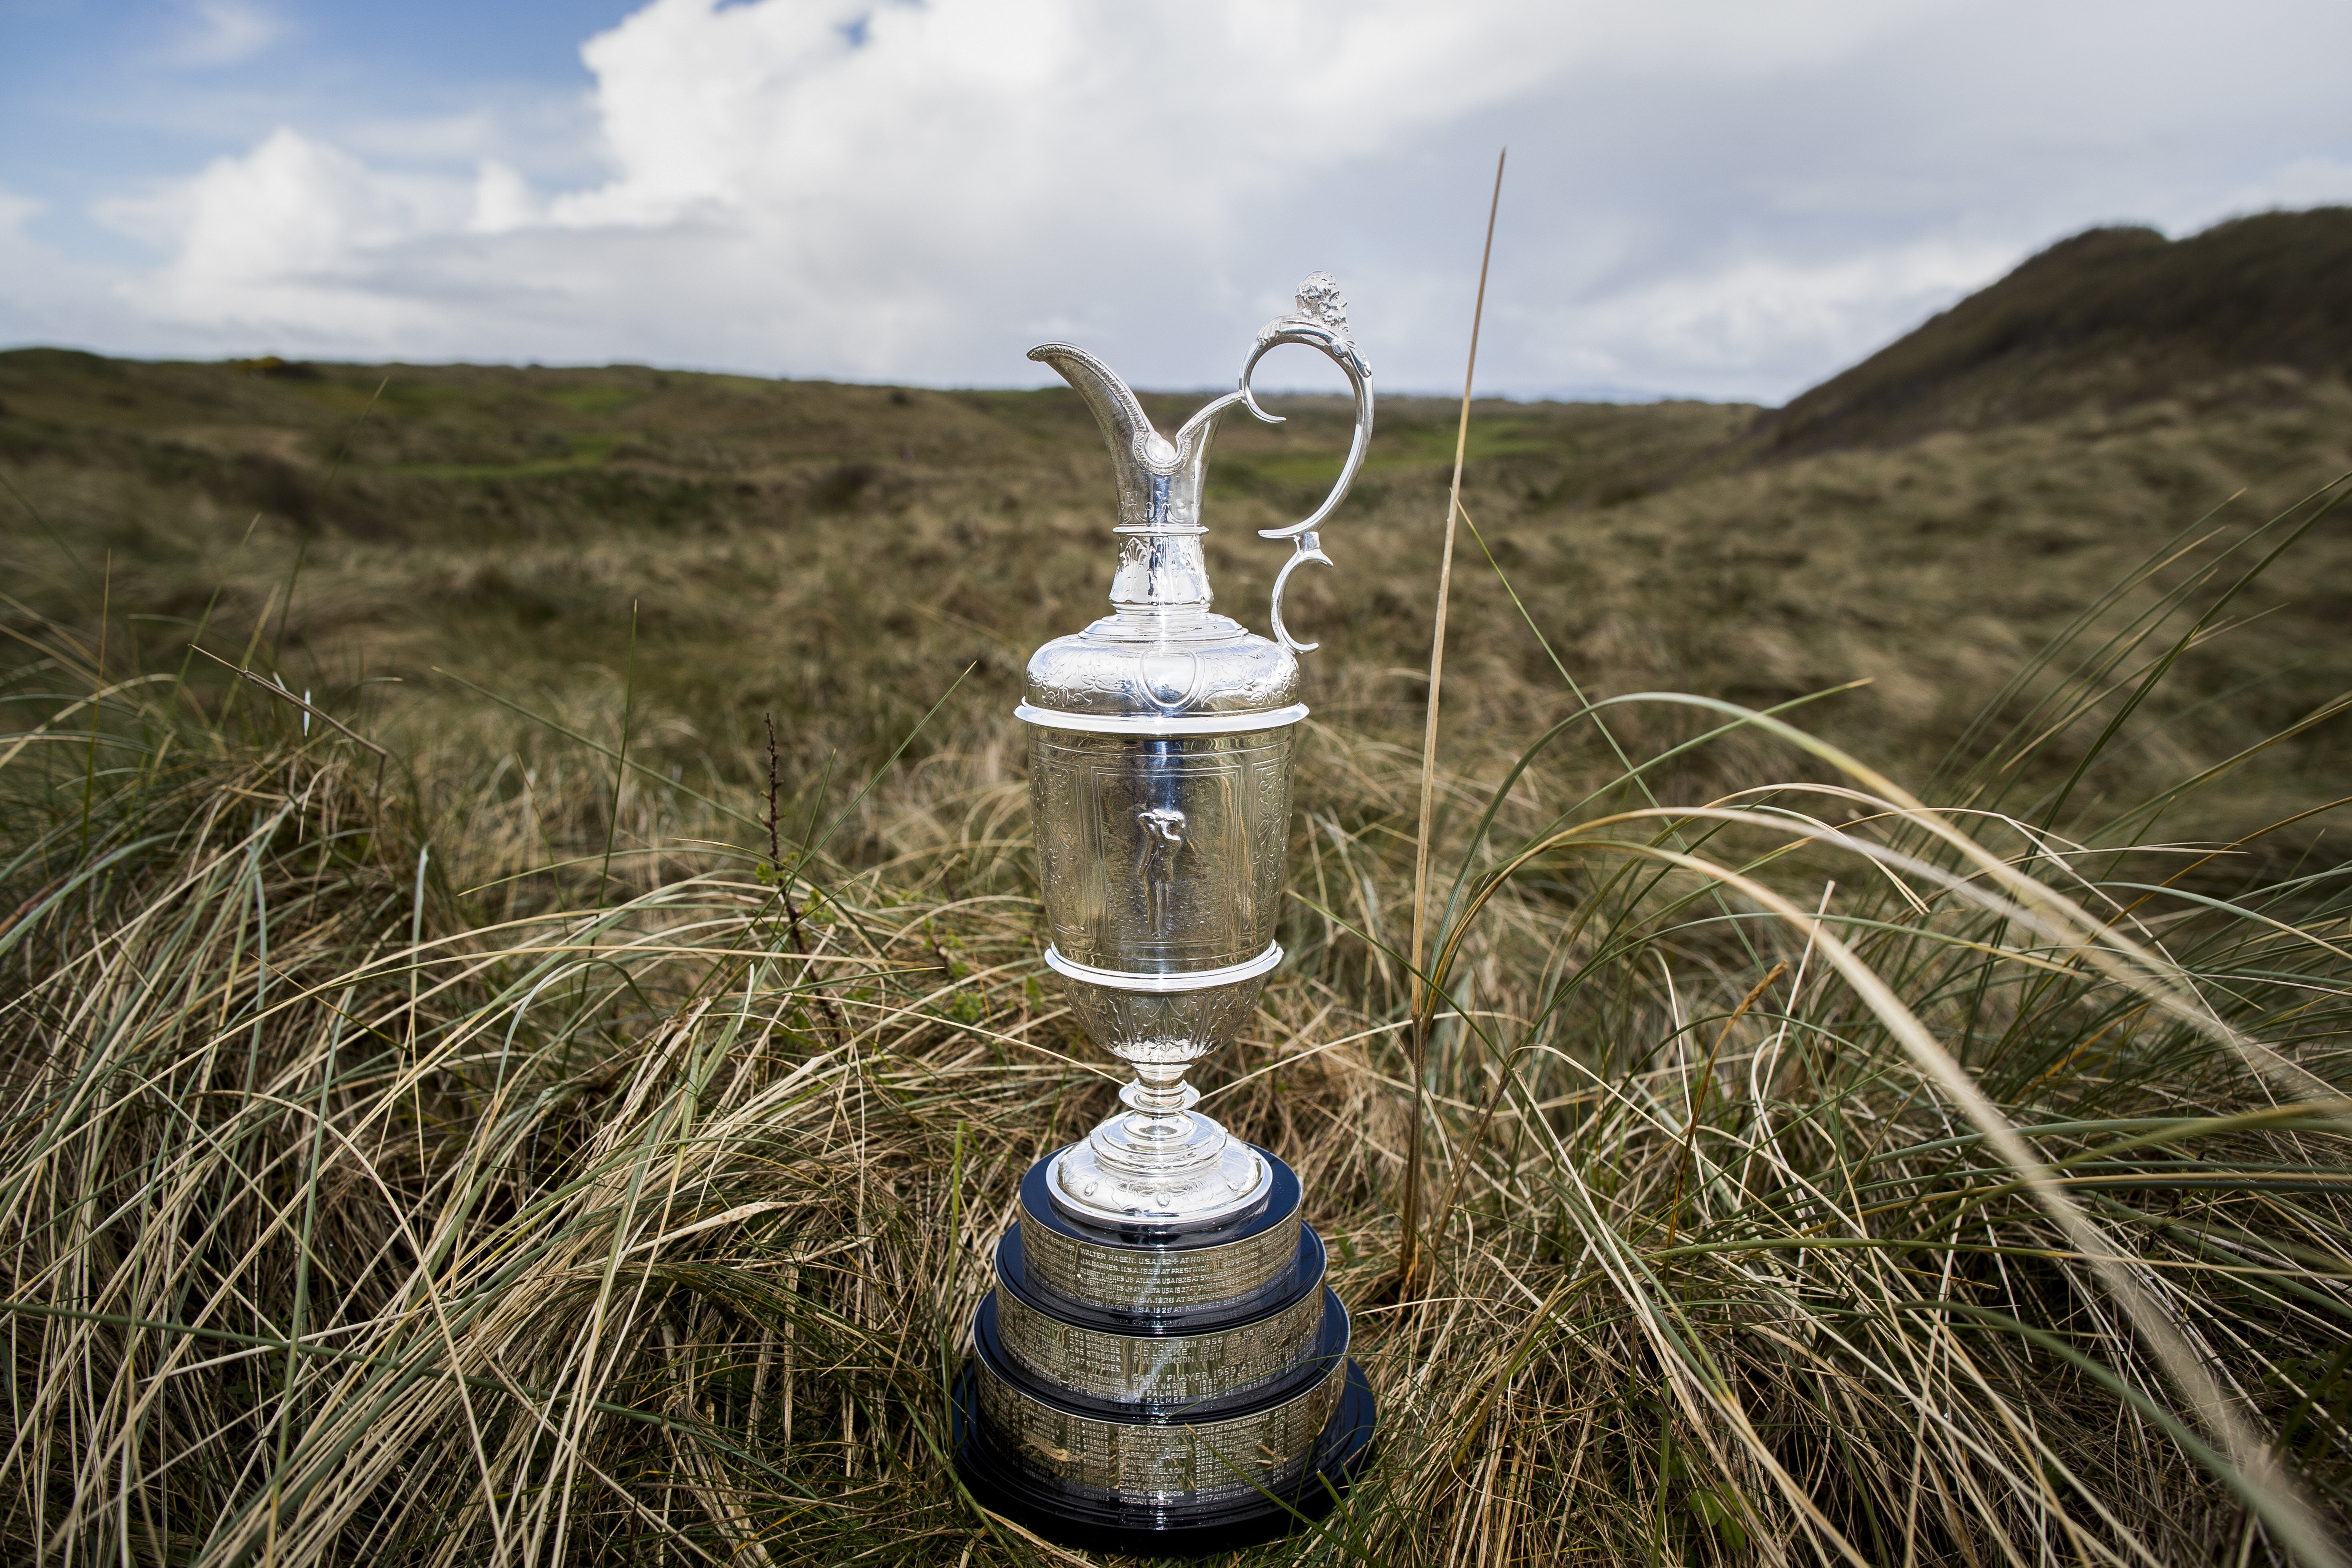 The Claret Jug is pictured at the 18th hole at Royal Portrush Golf Club. The 2020 Open Championship has been cancelled. Photo: PA